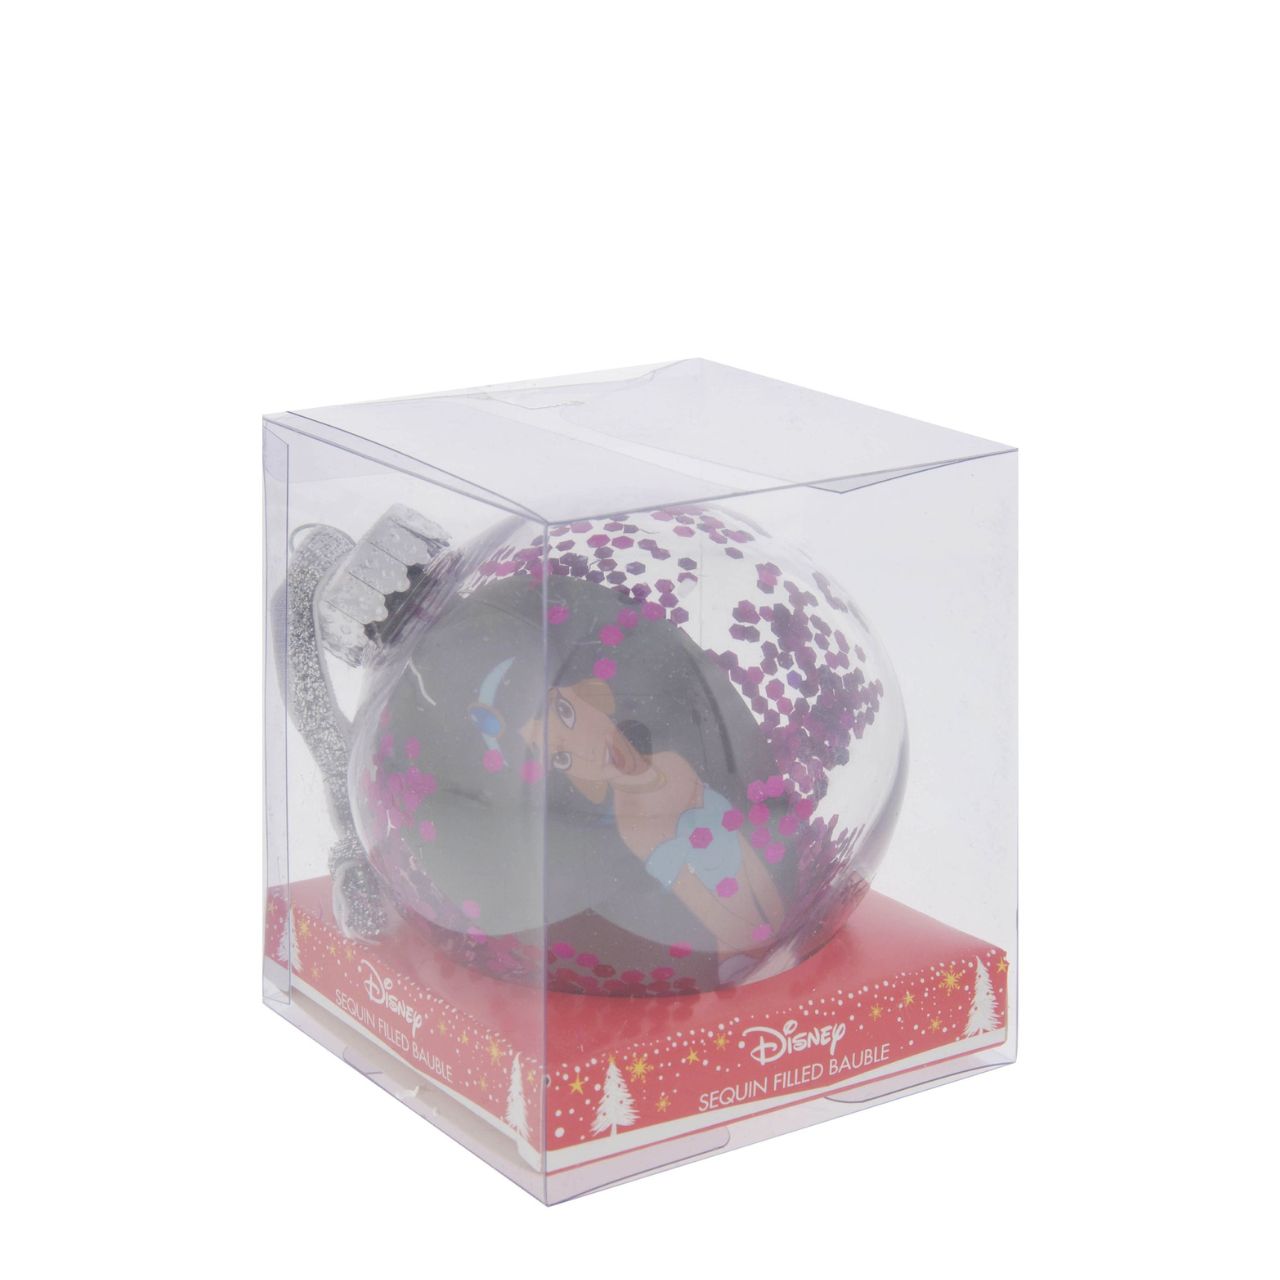 Disney Aladdin Sequin 2D Bauble  Bring the magic and glamour of the Disney princesses to the festivity with this wonderful 7.5cm aqua marine Aladdin sequin bauble.